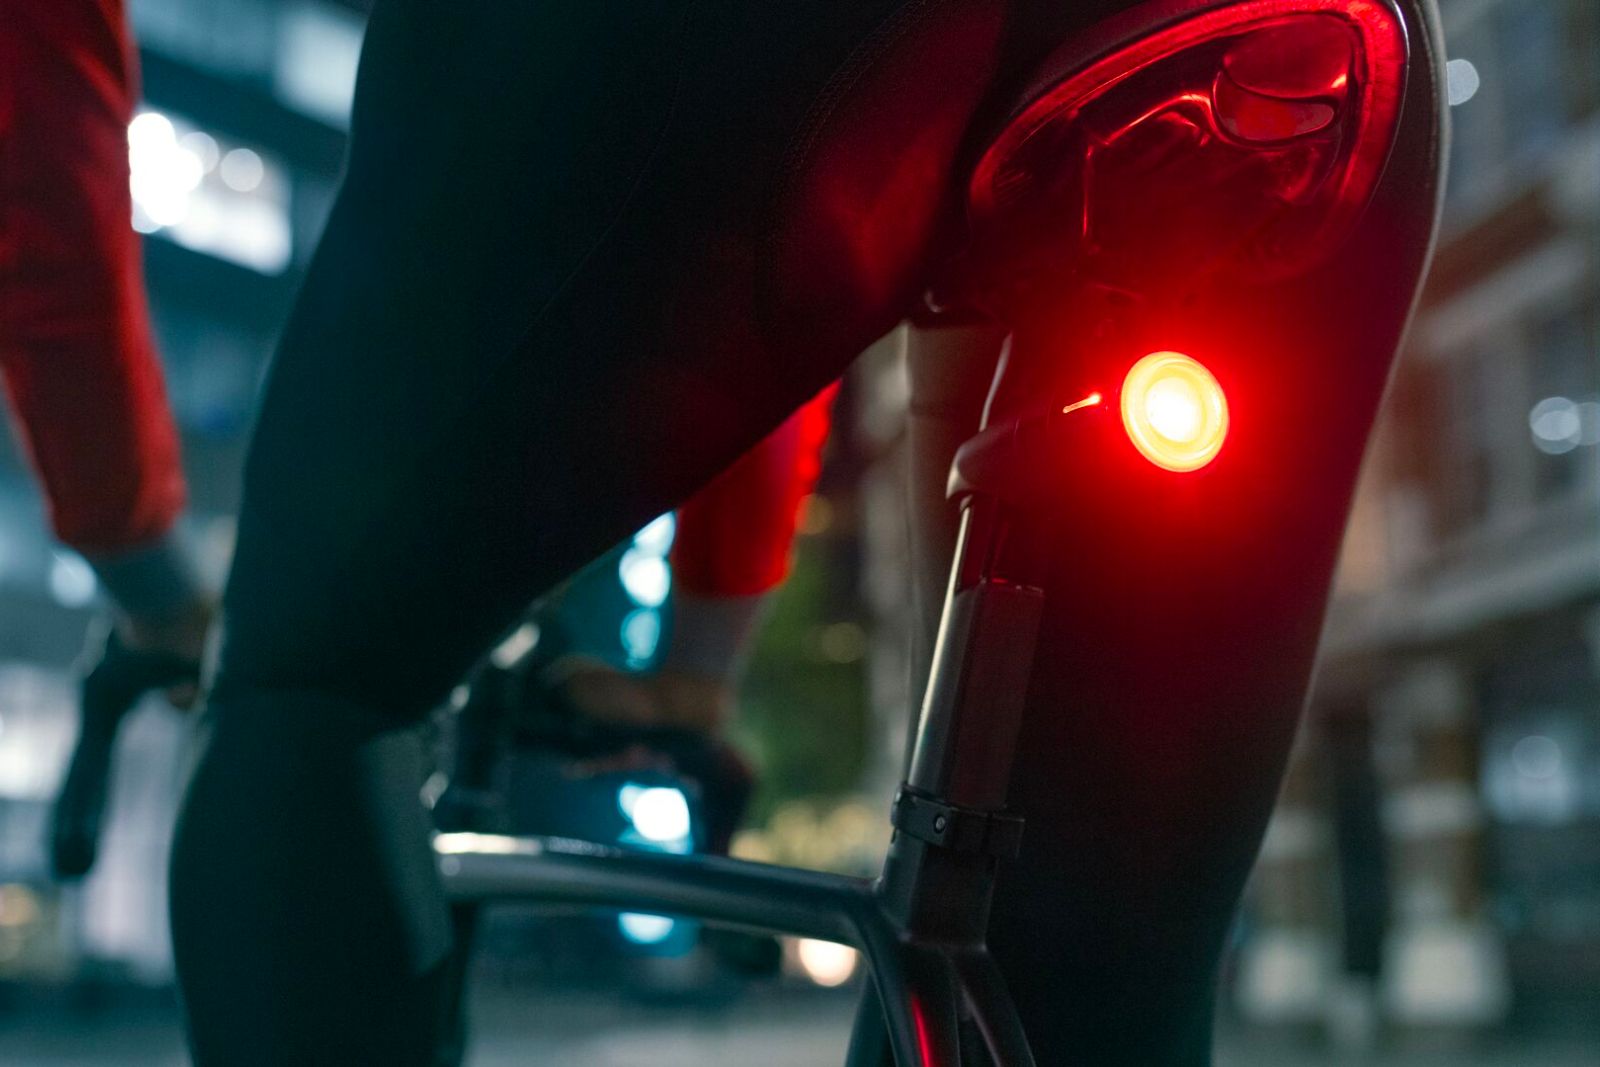 Get the Vodafone Curve Bike Light and GPS Tracker from as little as £2 per month photo 2